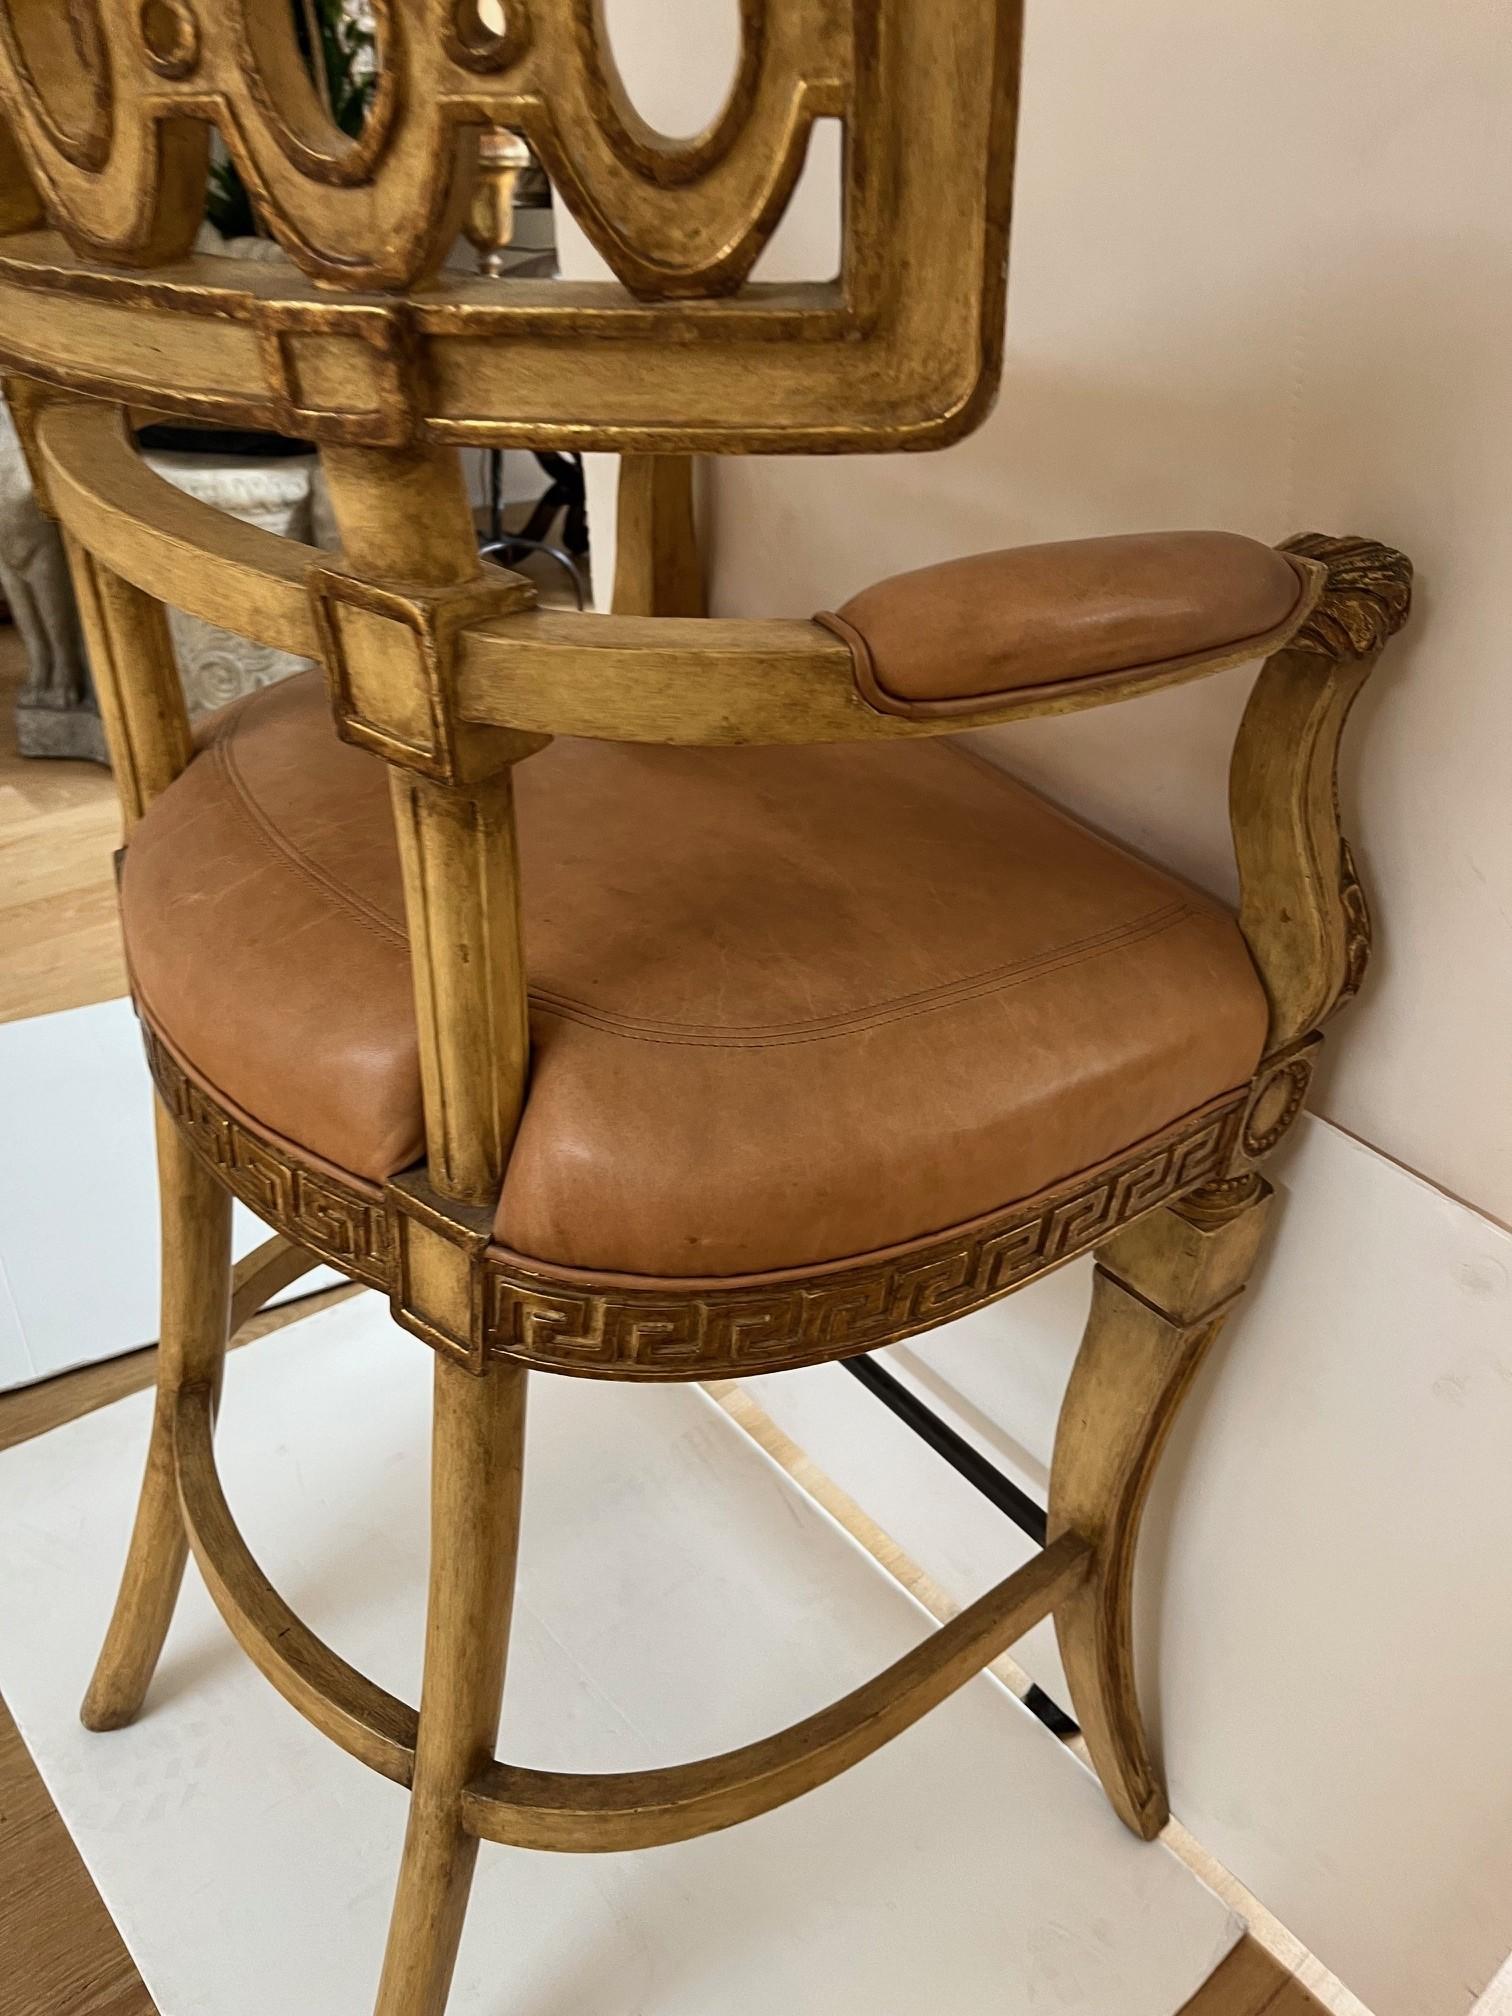 Made to Order Venetian Bar Stool in Antique Painted Finish with Gilded Detail For Sale 4